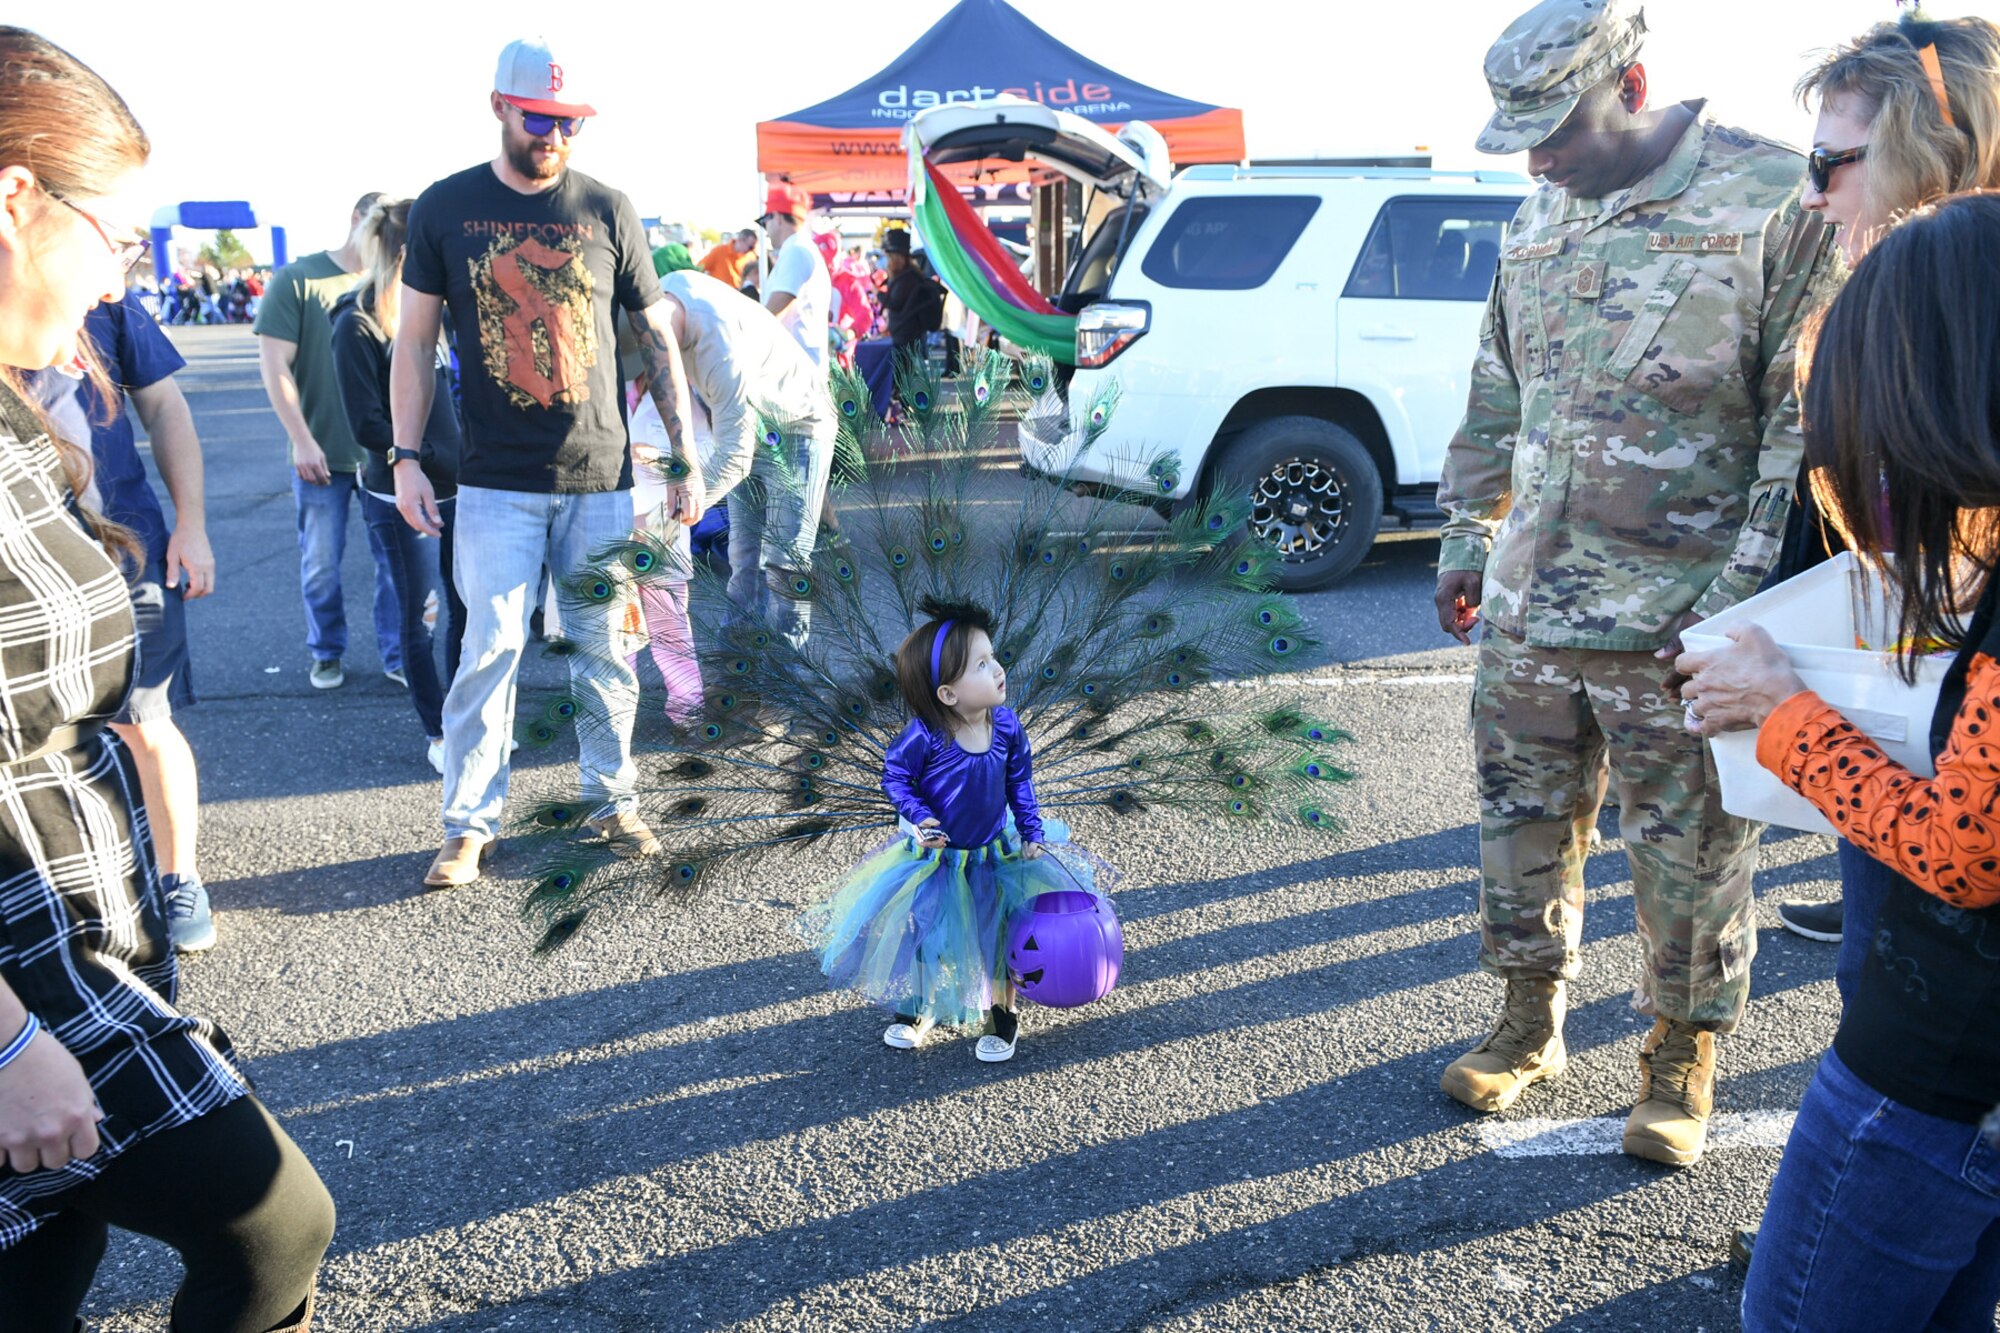 Chief Master Sgt. Rodney Koonce, 75th Air Base Wing Command Chief is approached by Miya Suiter in her handmade peacock costume during the Haunting on the Hill celebration Oct. 19, 2018 at Hill Air Force Base, Utah. (U.S. Air Force photo by Cynthia Griggs)